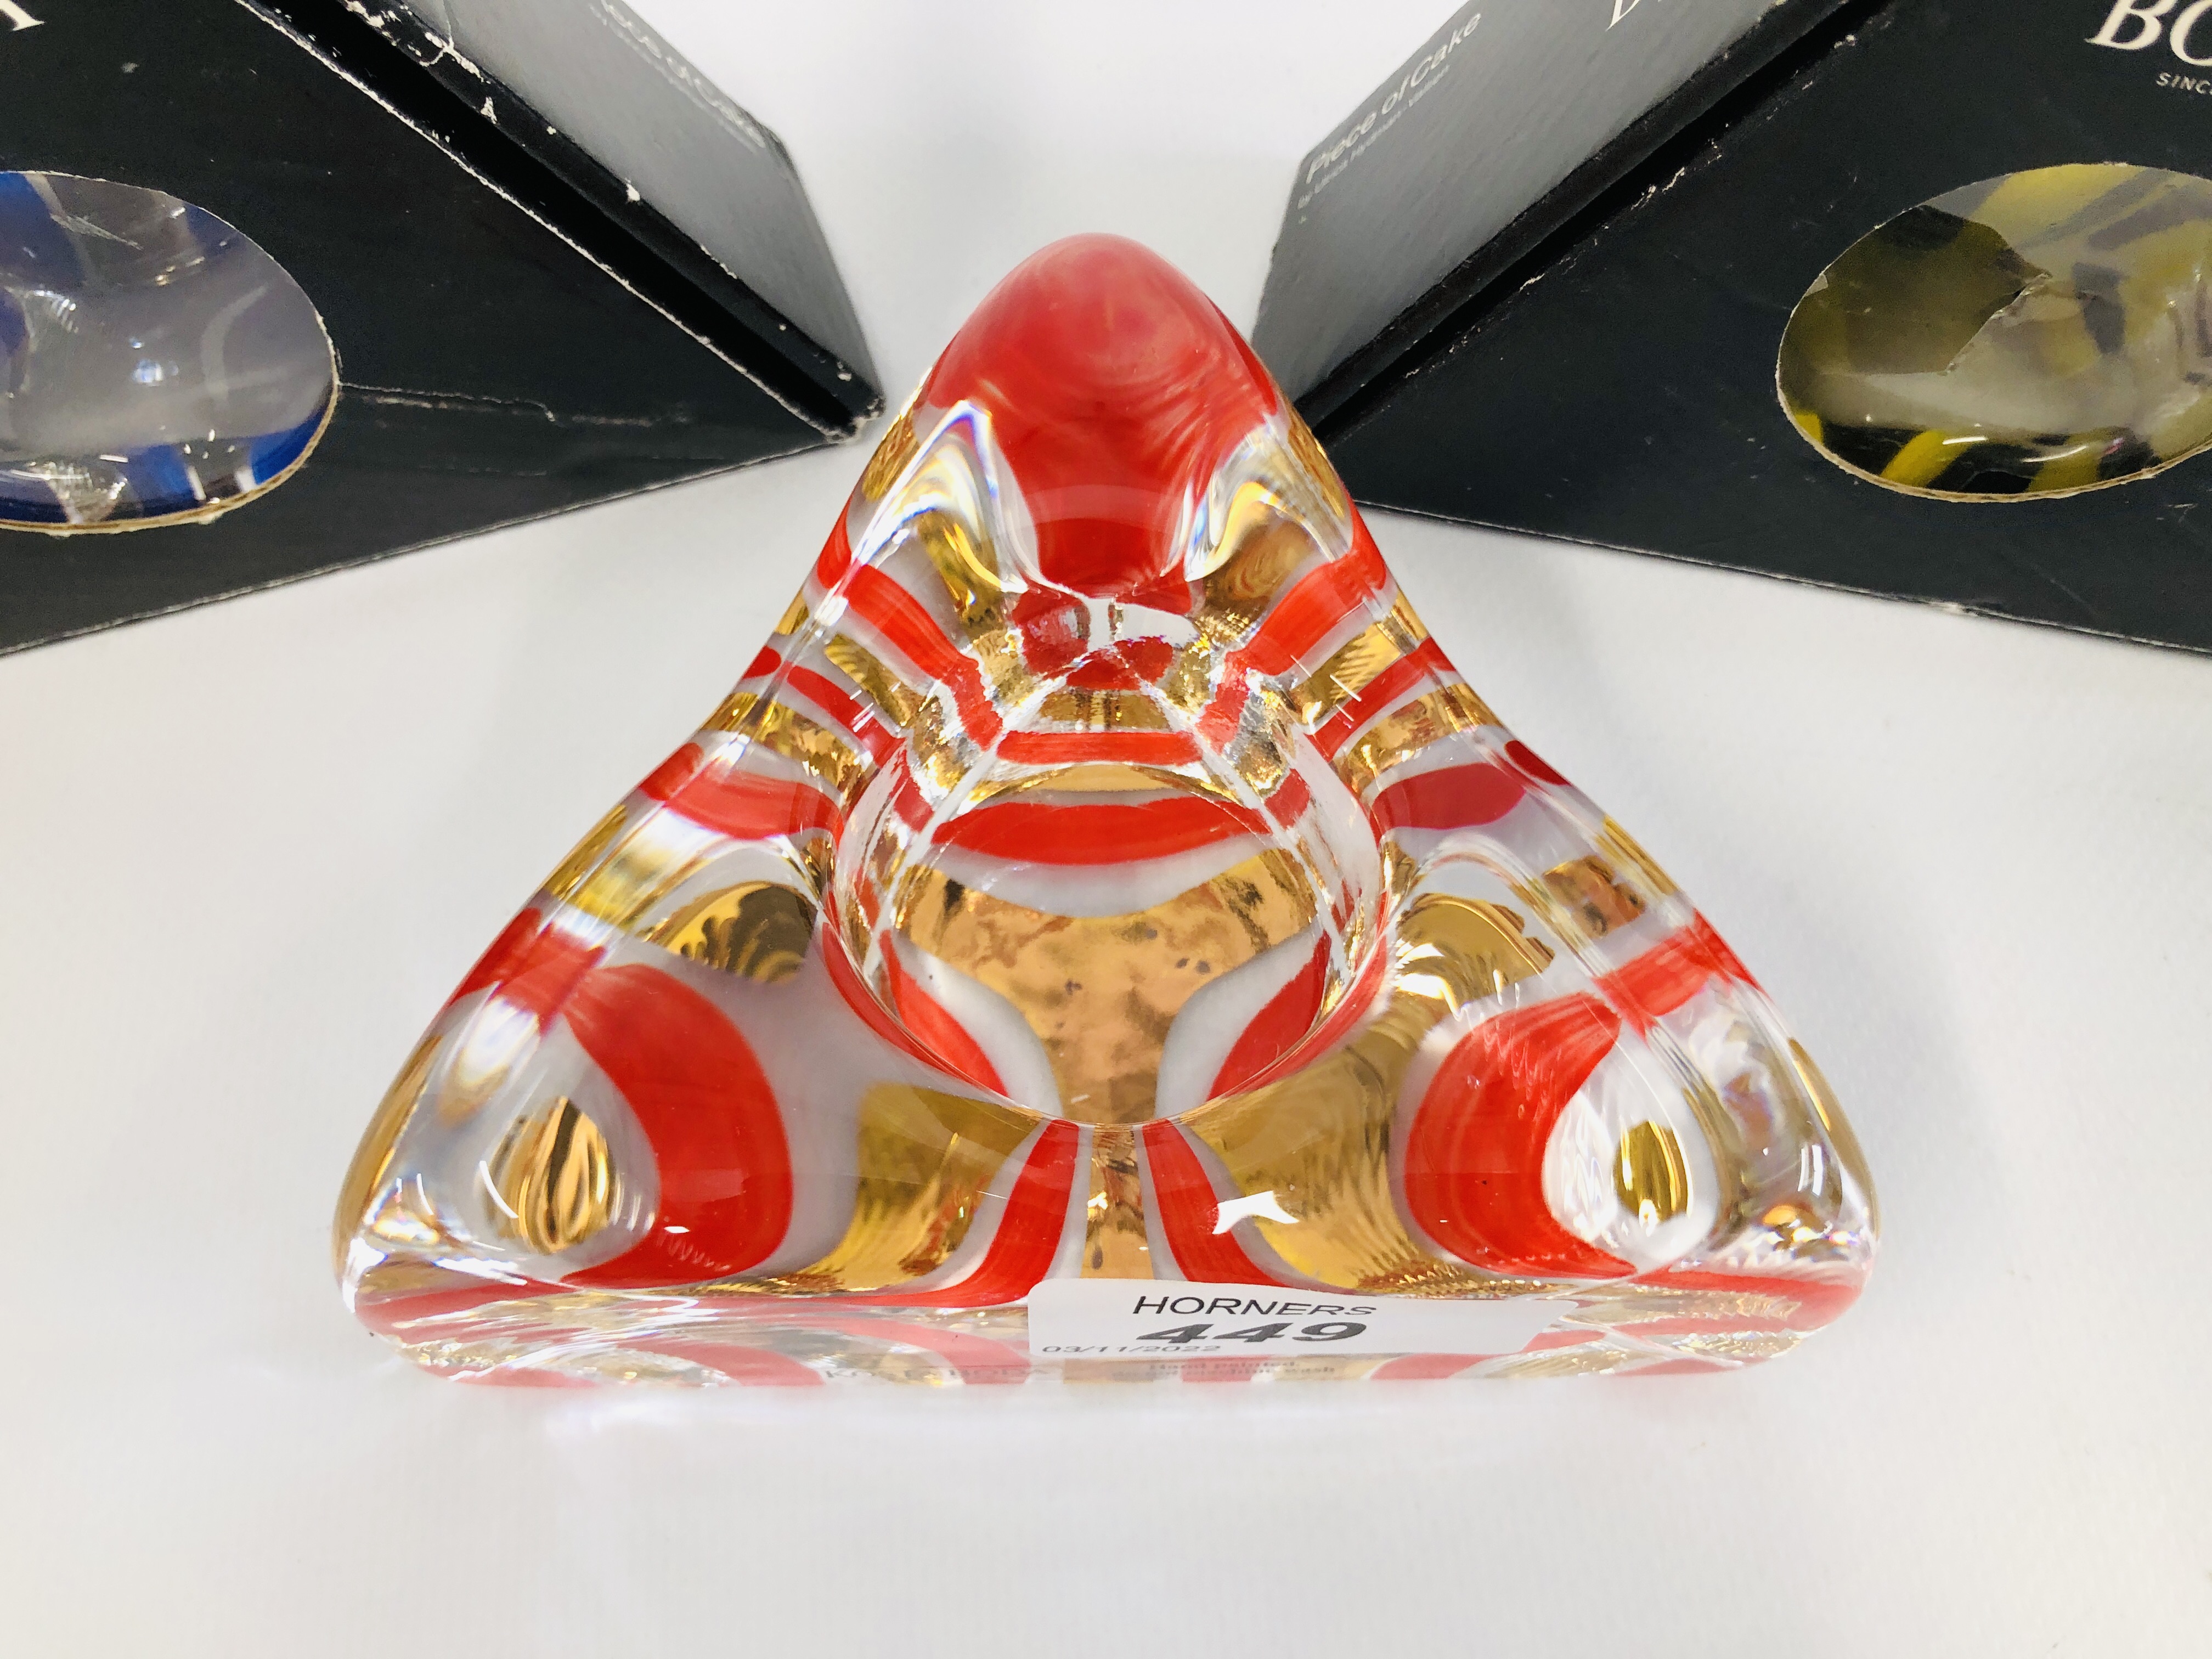 THREE KOSTA BODA "PIECE OF CAKE" TEA LIGHT HOLDERS BY ULRICA VALLIEN (2 BOXED) - Image 2 of 3